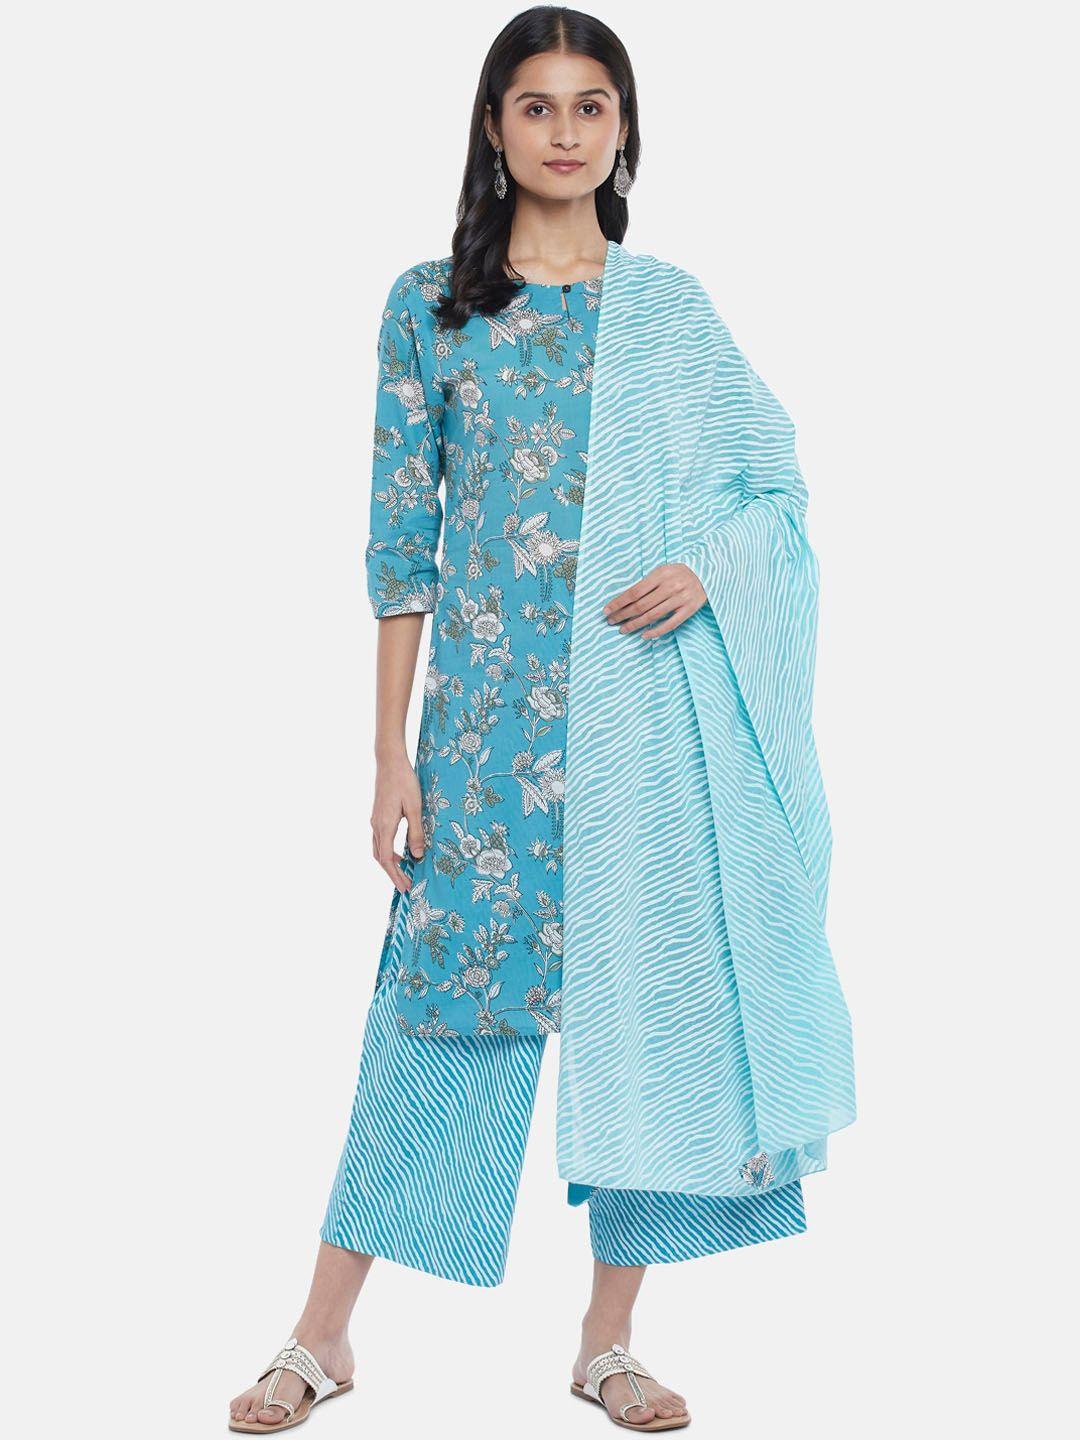 rangmanch by pantaloons women turquoise blue floral printed pure cotton kurta with palazzos & dupatta